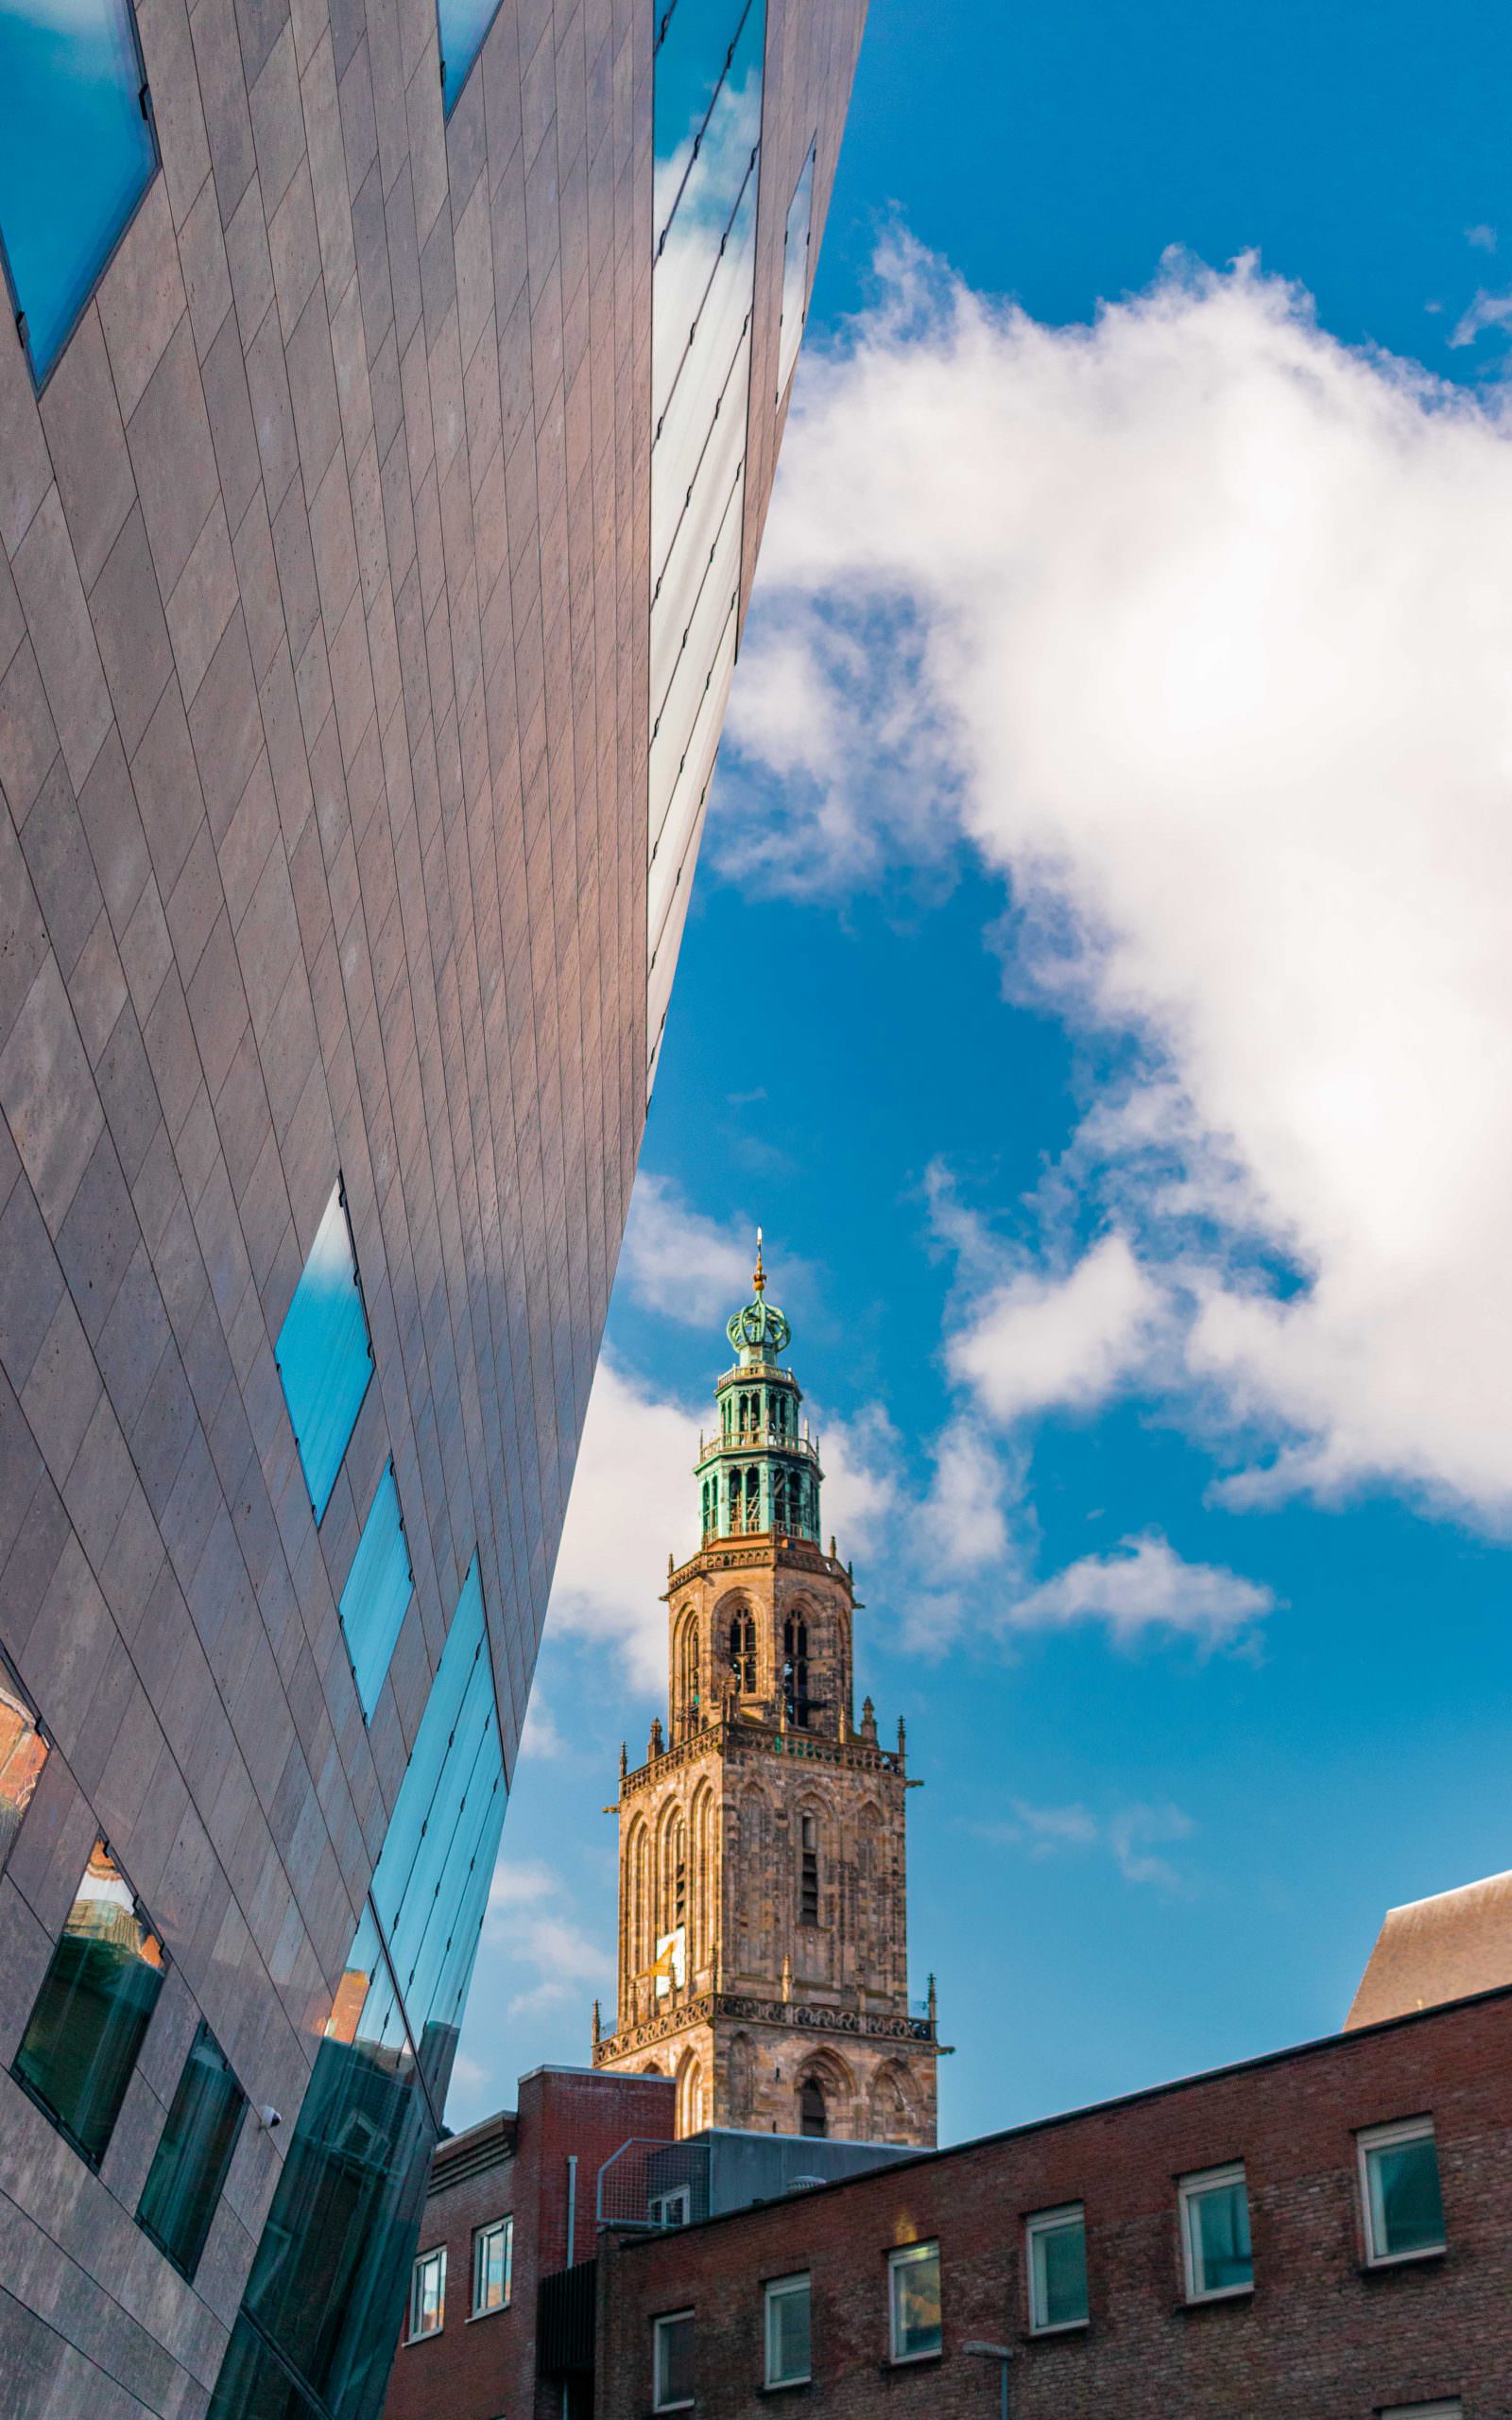 groningen forum and martini tower